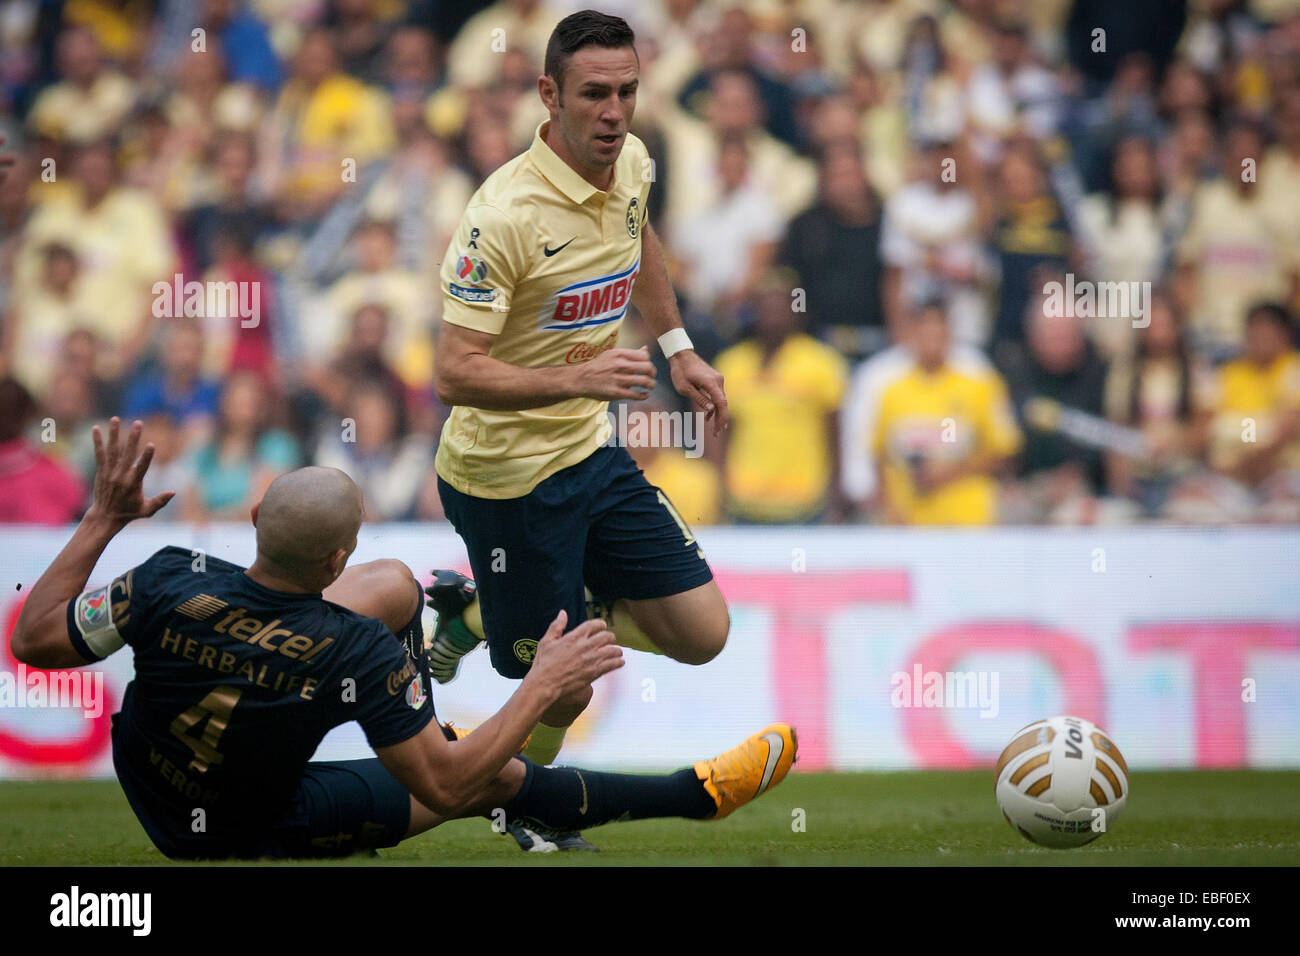 Mexico City, Mexico. 29th Nov, 2014. Miguel Layun (R) of America vies with Dario Veron of UNAM's Pumas, during the quarterfinal match of Opening Tournament of the MX League, at Aztec Stadium, in Mexico City, capital of Mexico, on Nov. 29, 2014. © Pedro Mera/Xinhua/Alamy Live News Stock Photo